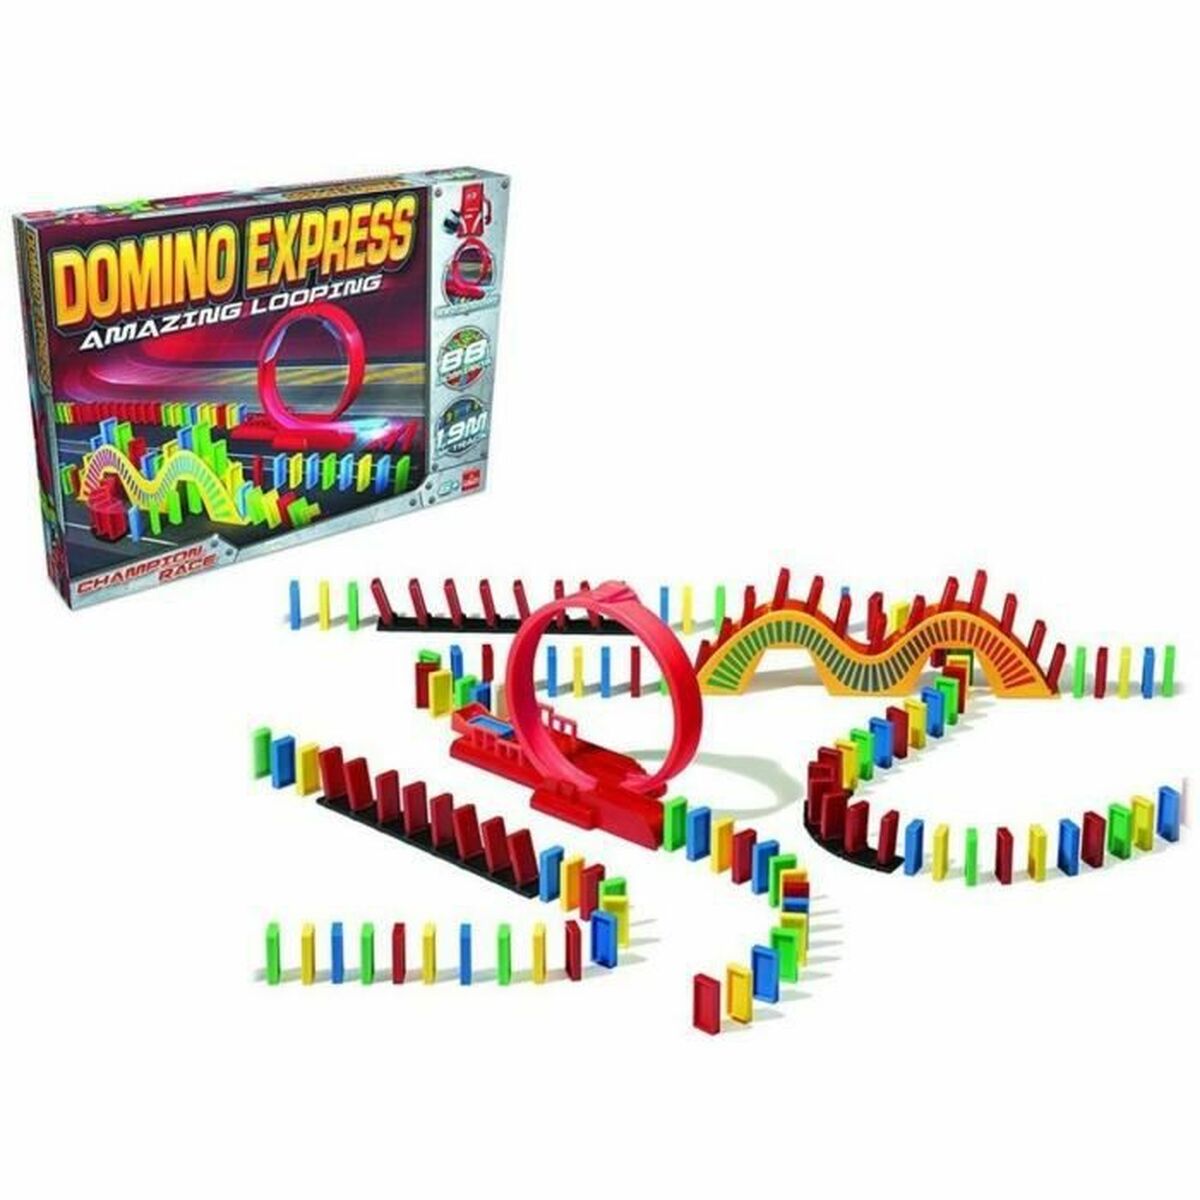 Domino Goliath Express Amazing Looping